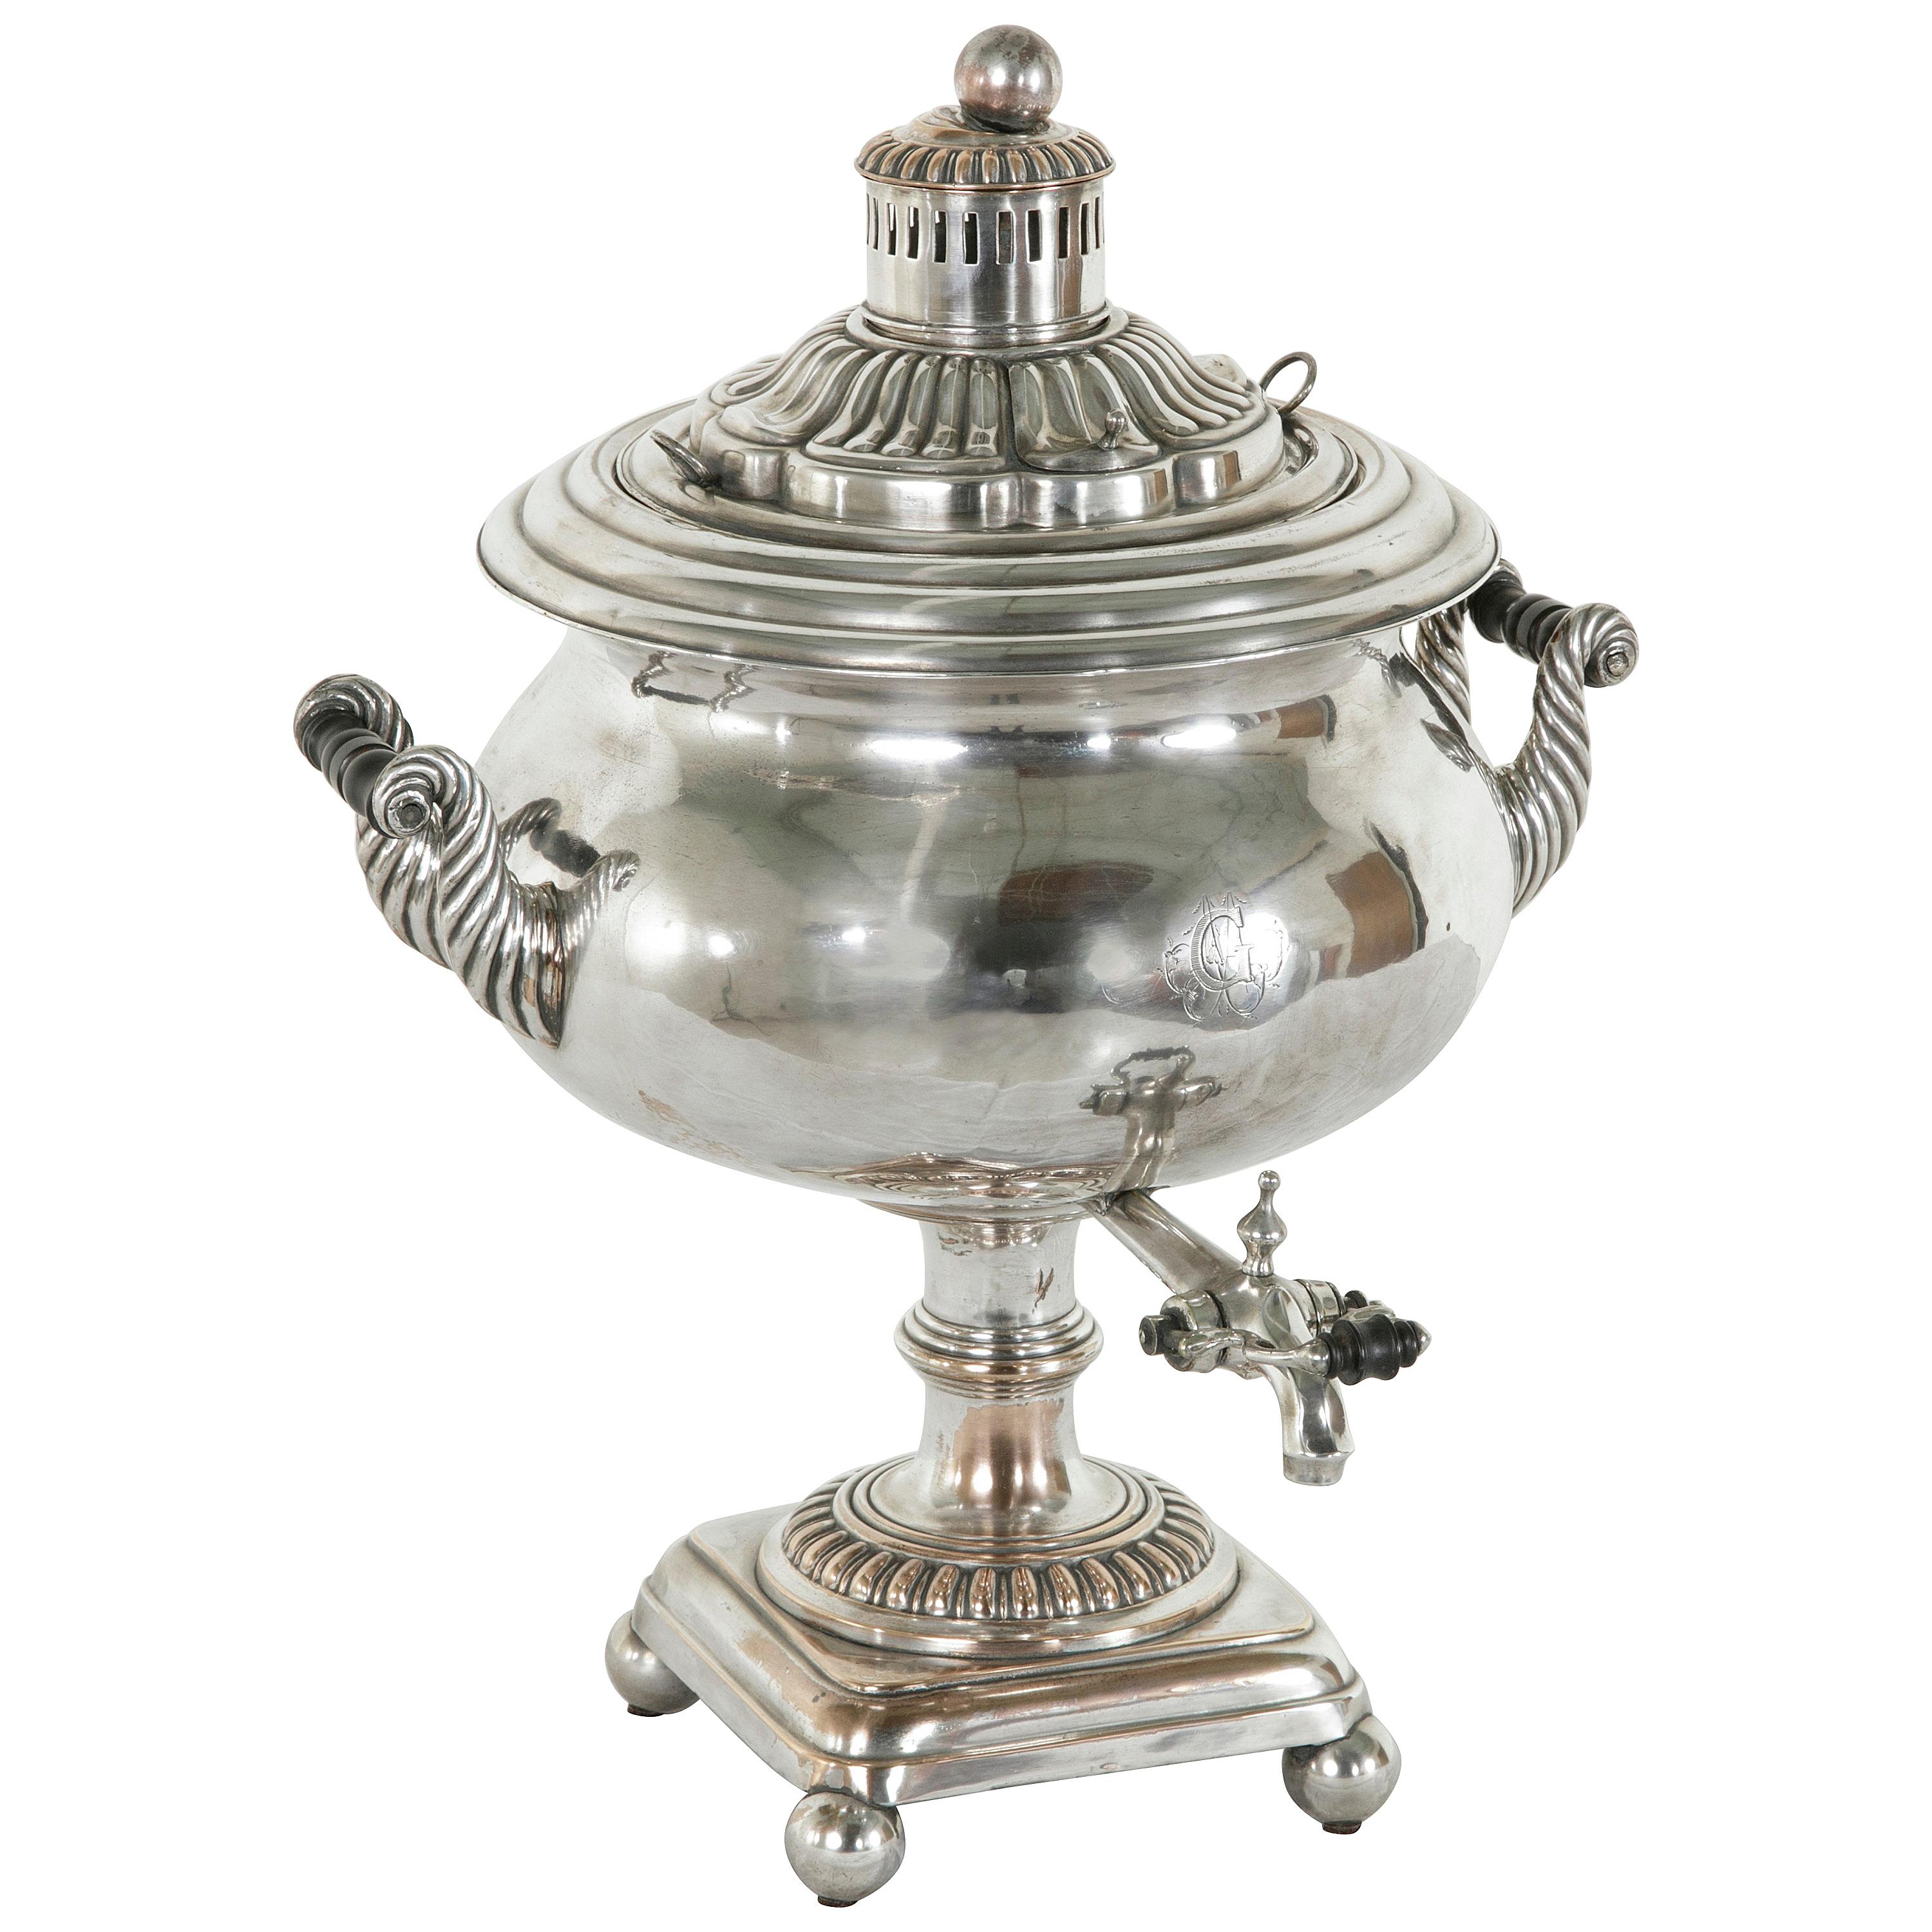 Late 19th Century Silver Samovar or Tea Urn with Lid and Ebonized Handles